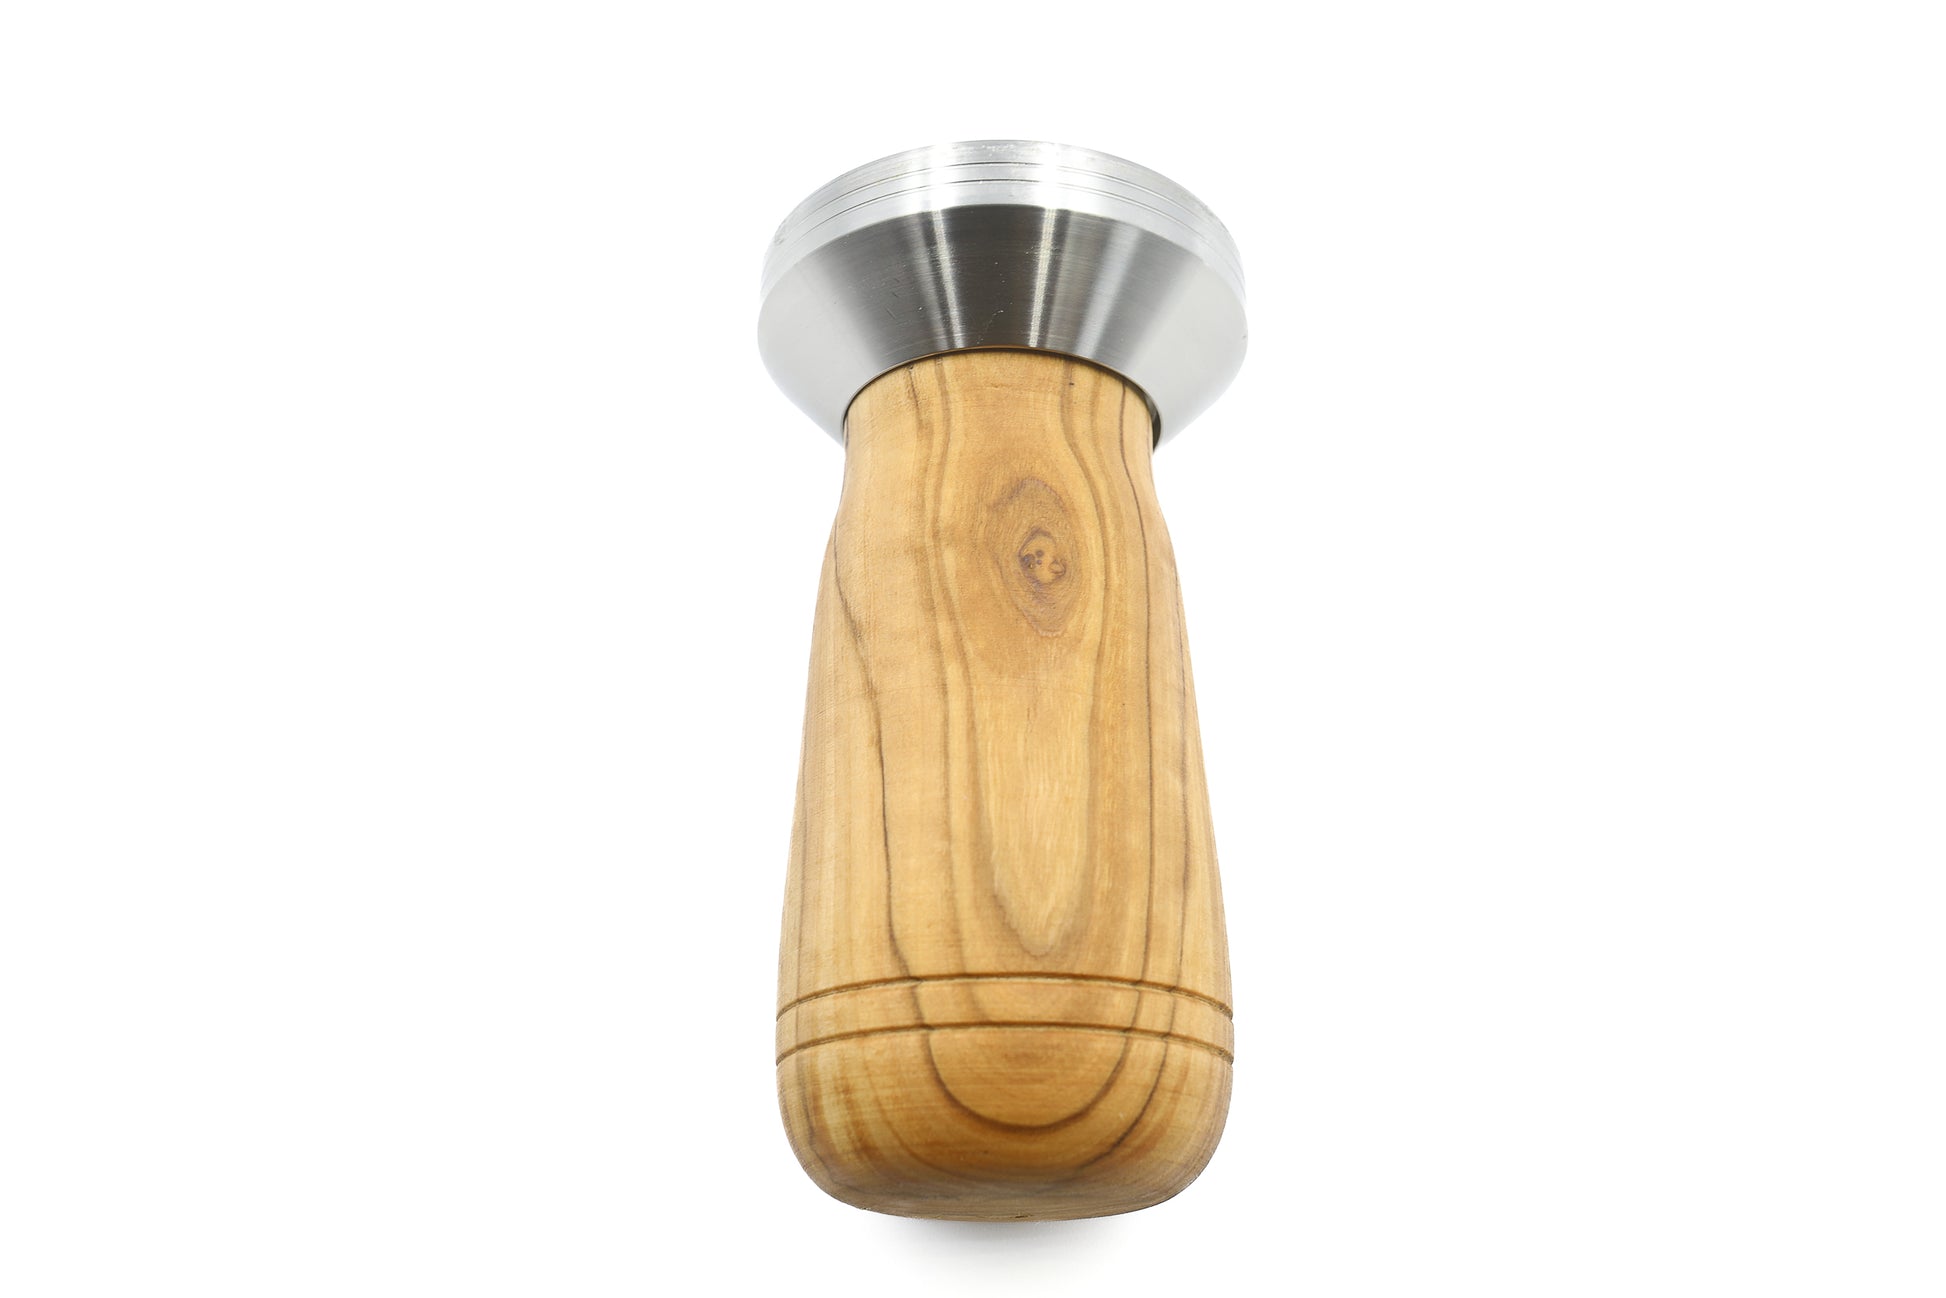 Elegant espresso accessory in olive wood and stainless steel, including a tamper with a holder